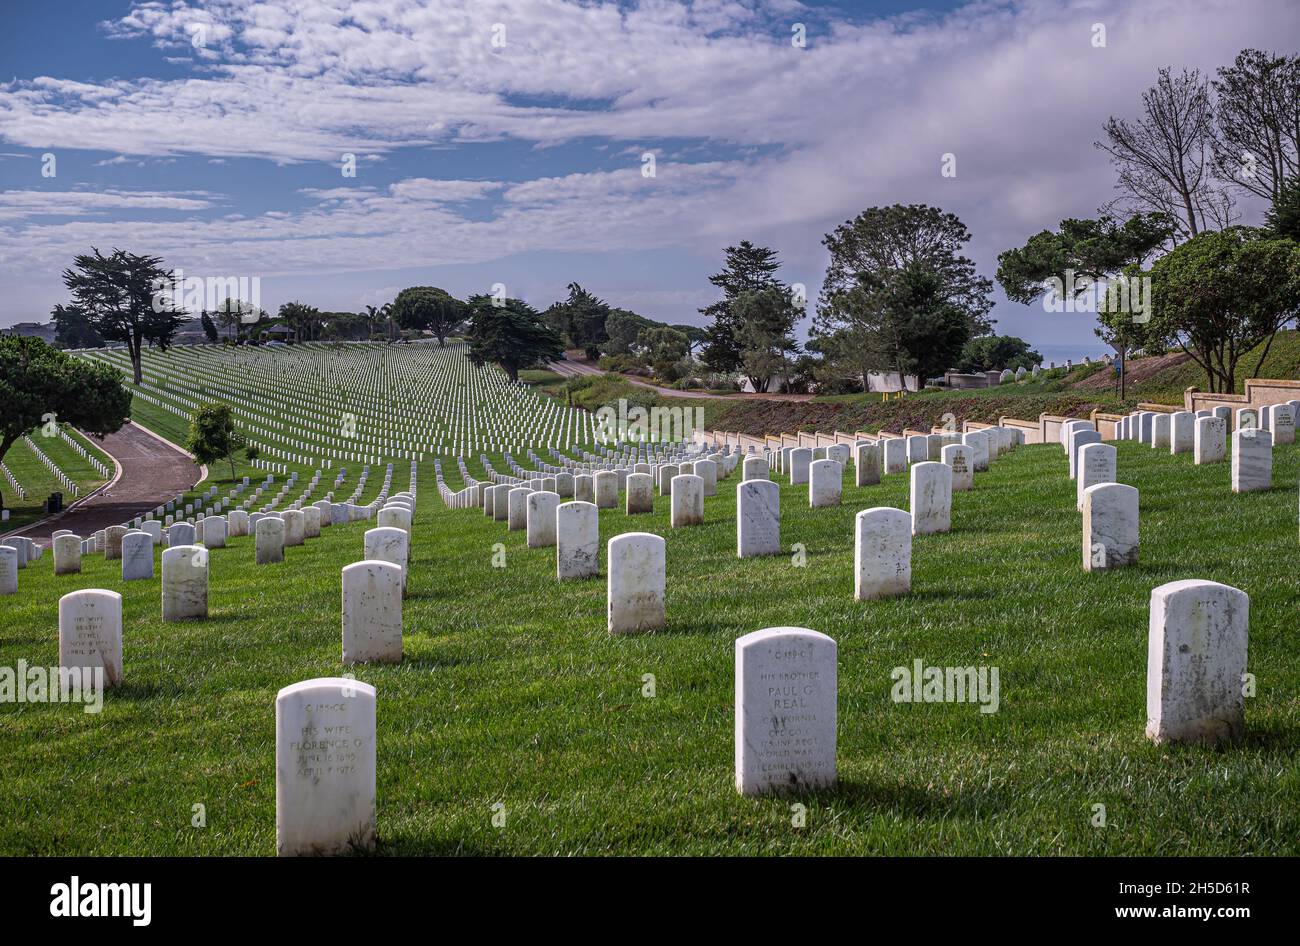 San Diego, California, USA - October 5, 2021: Fort Rosecrans National Cemetery. Slanted green landscape of white tombstone rows creating visual effect Stock Photo